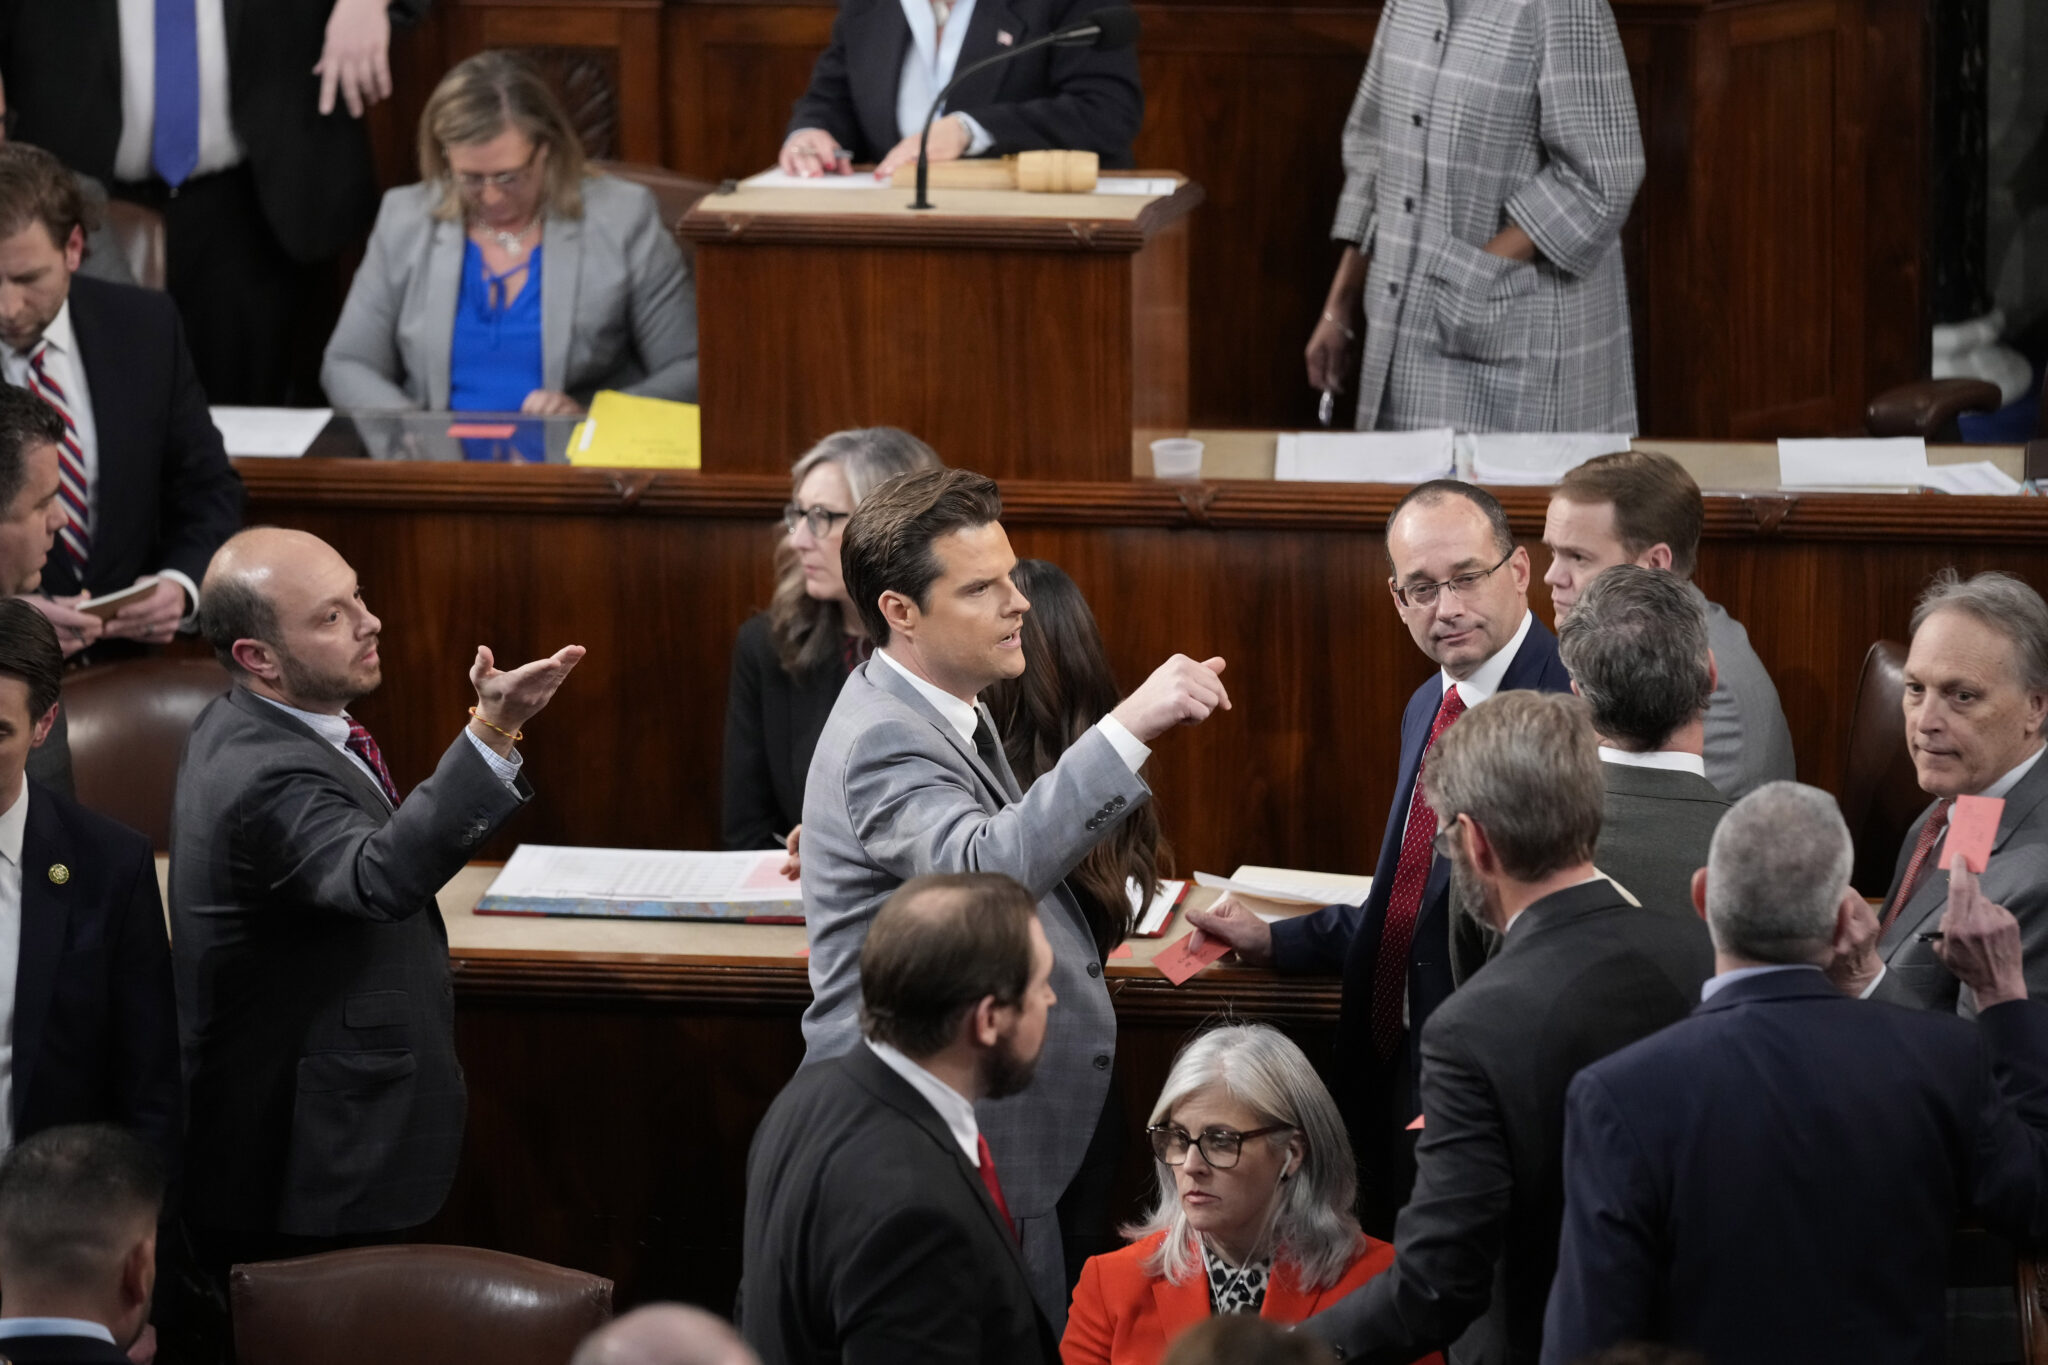 Rep. Matt Gaetz, R-Fla., gestures during a motion to adjourn after the 14th round of voting for speaker in the House chamber as the House meets for the fourth day to elect a speaker and convene the 118th Congress in Washington, Friday, Jan. 6, 2023. (AP Photo/Andrew Harnik)